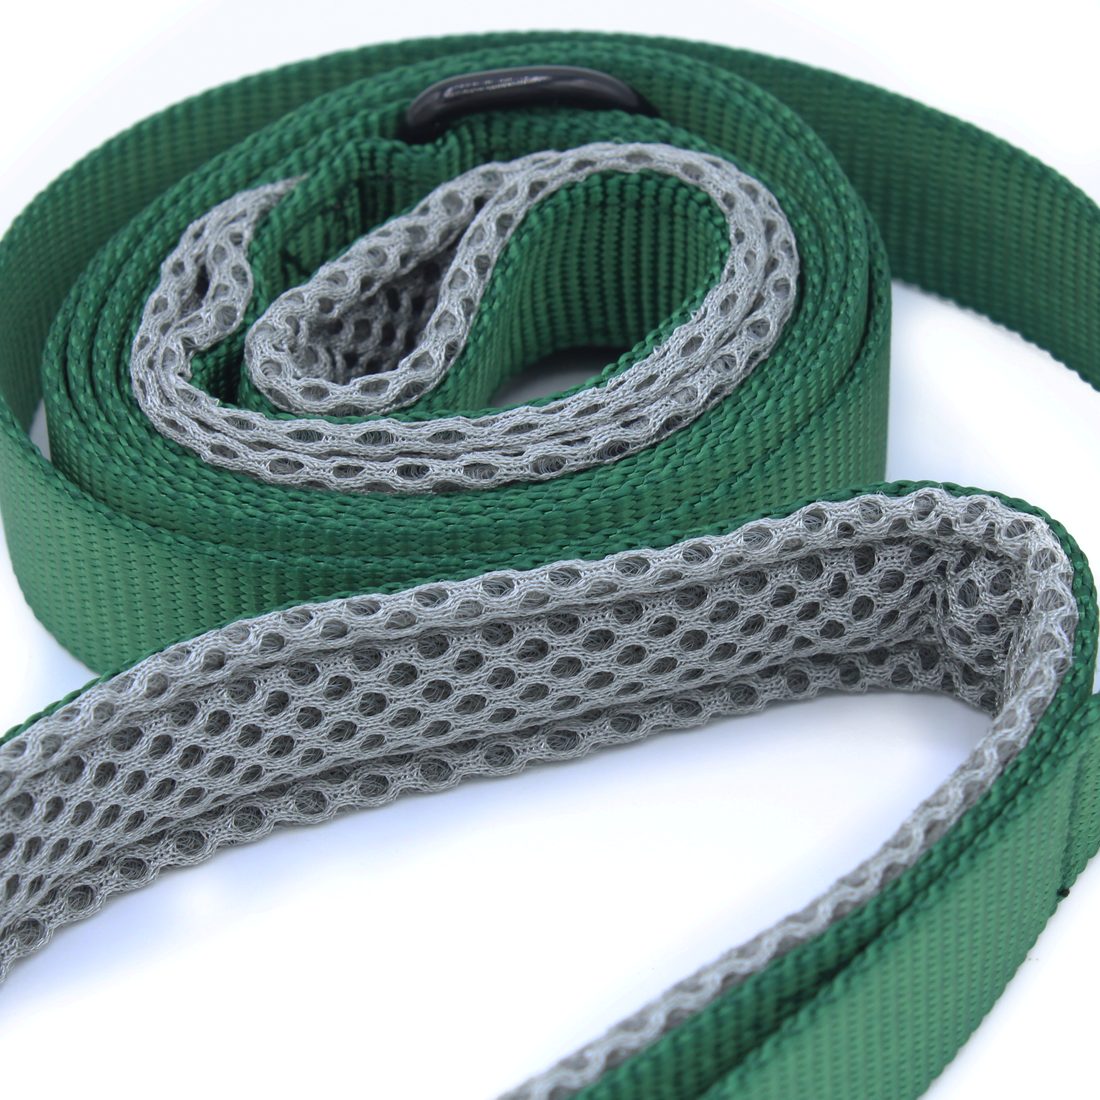 a closeup of a forest green leash with grey mesh handles